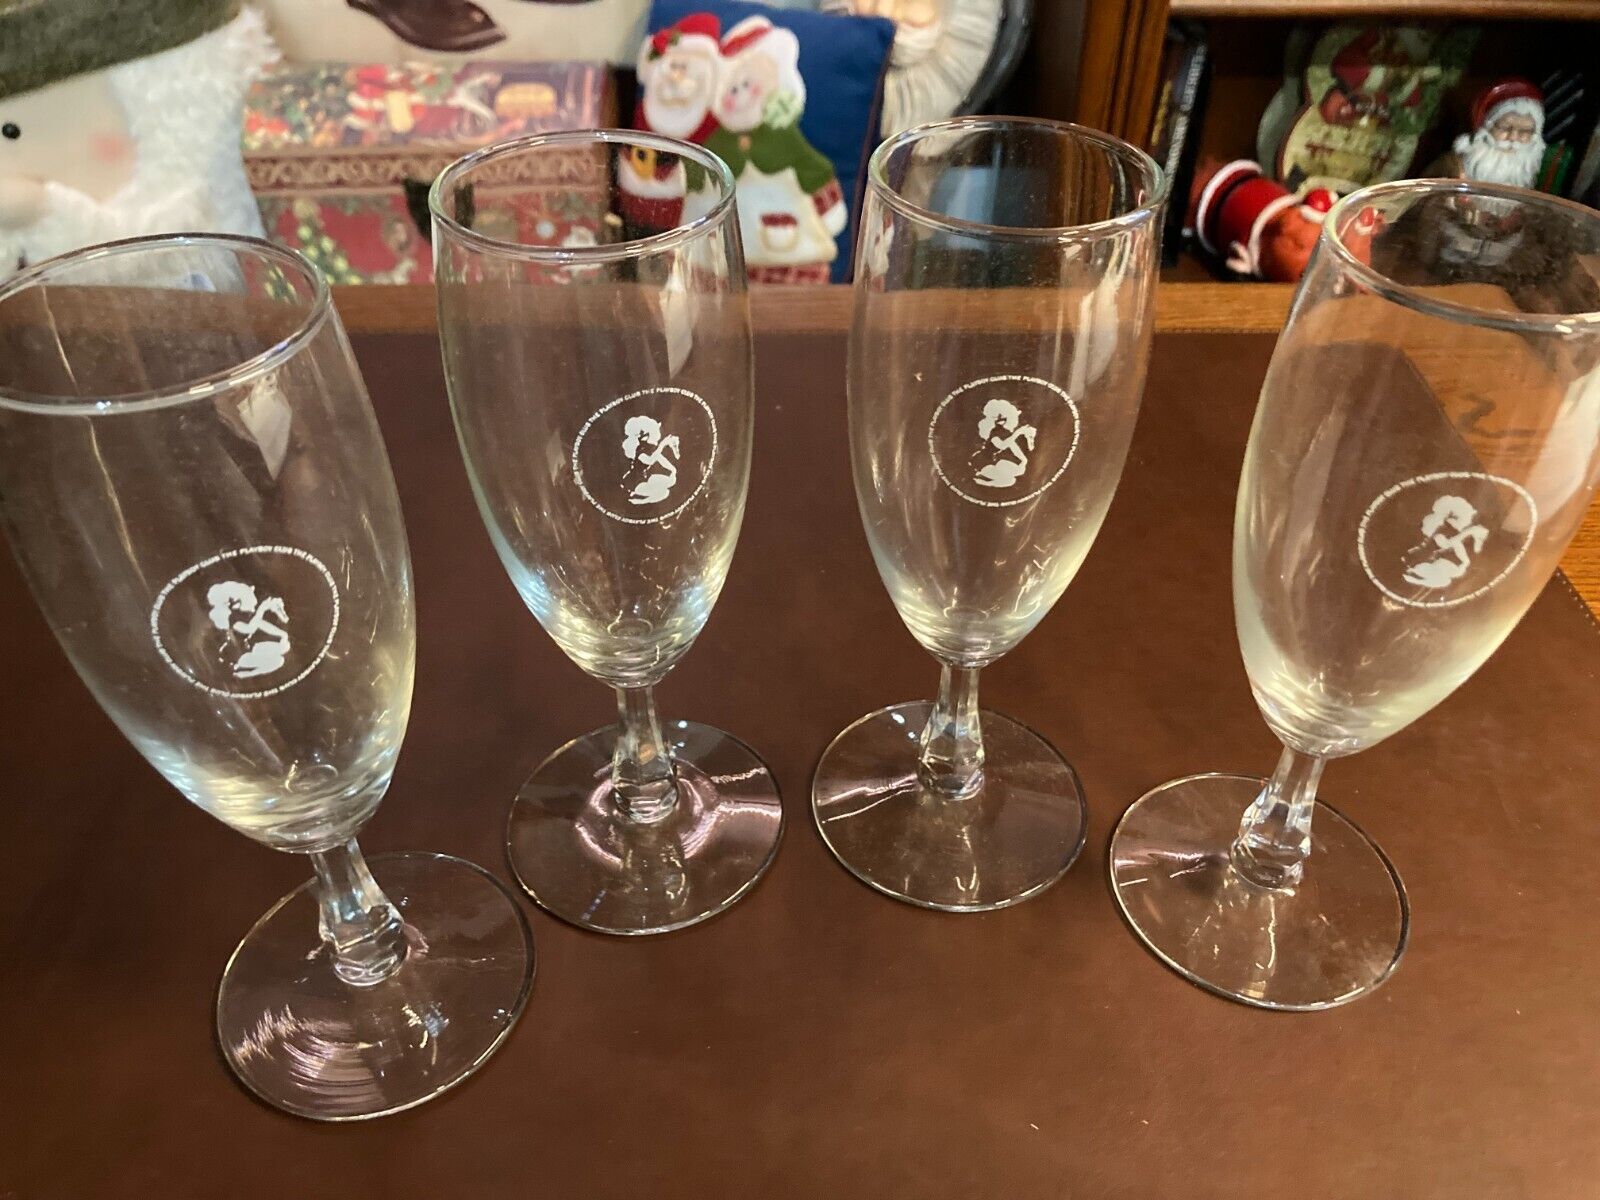 Vintage Playboy Champagne Glasses from the Chicago Playboy Club - Very Rare